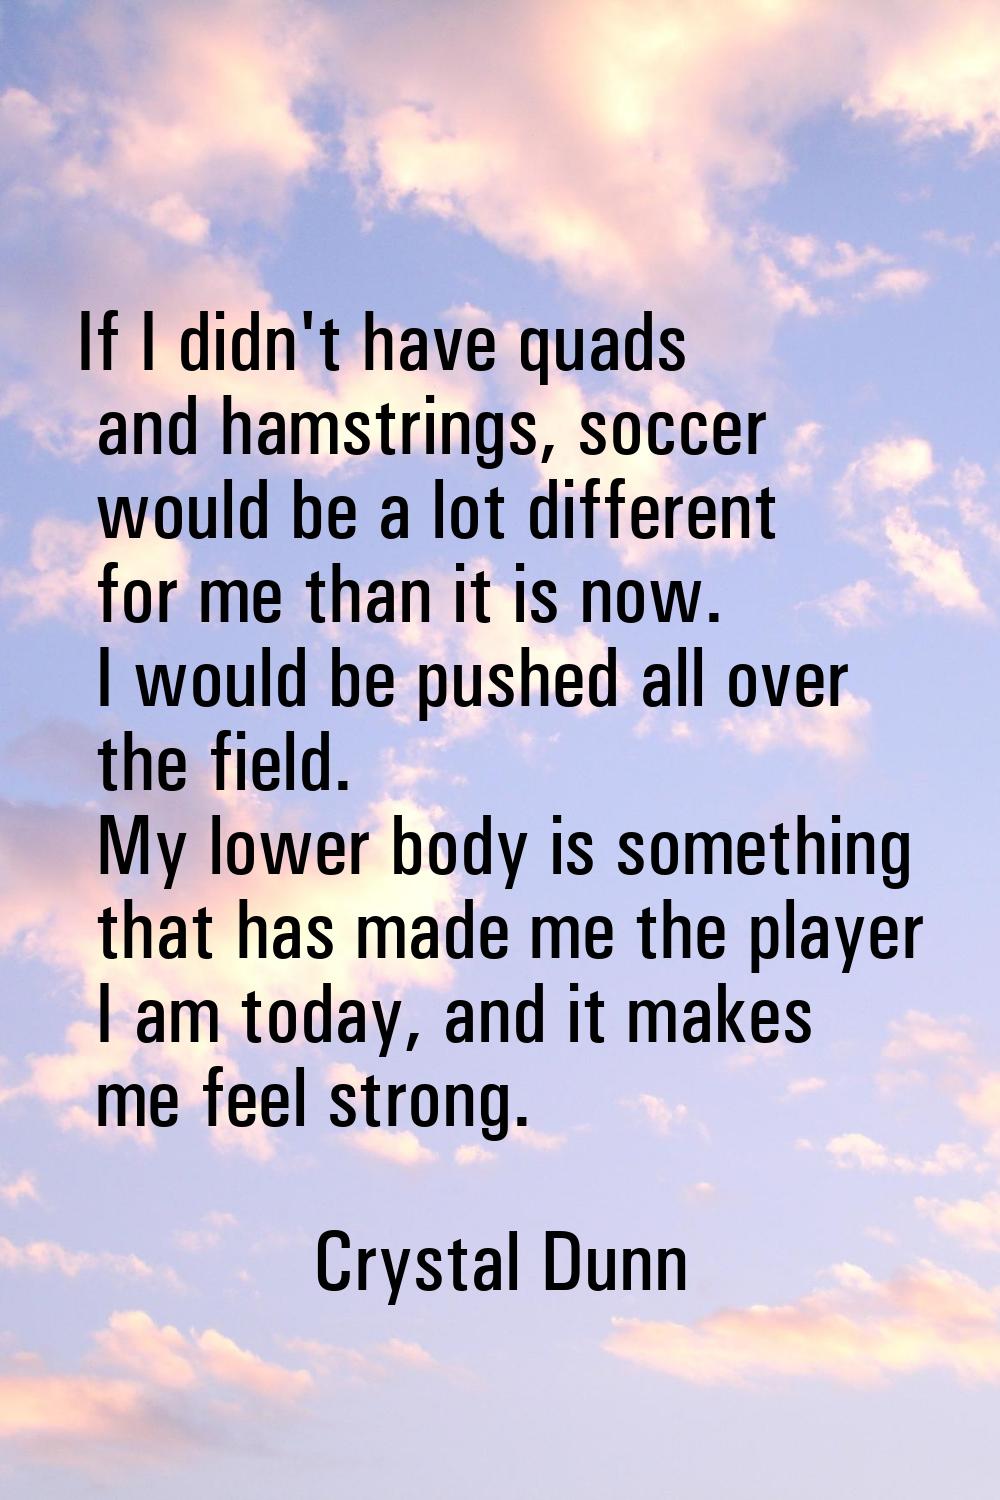 If I didn't have quads and hamstrings, soccer would be a lot different for me than it is now. I wou